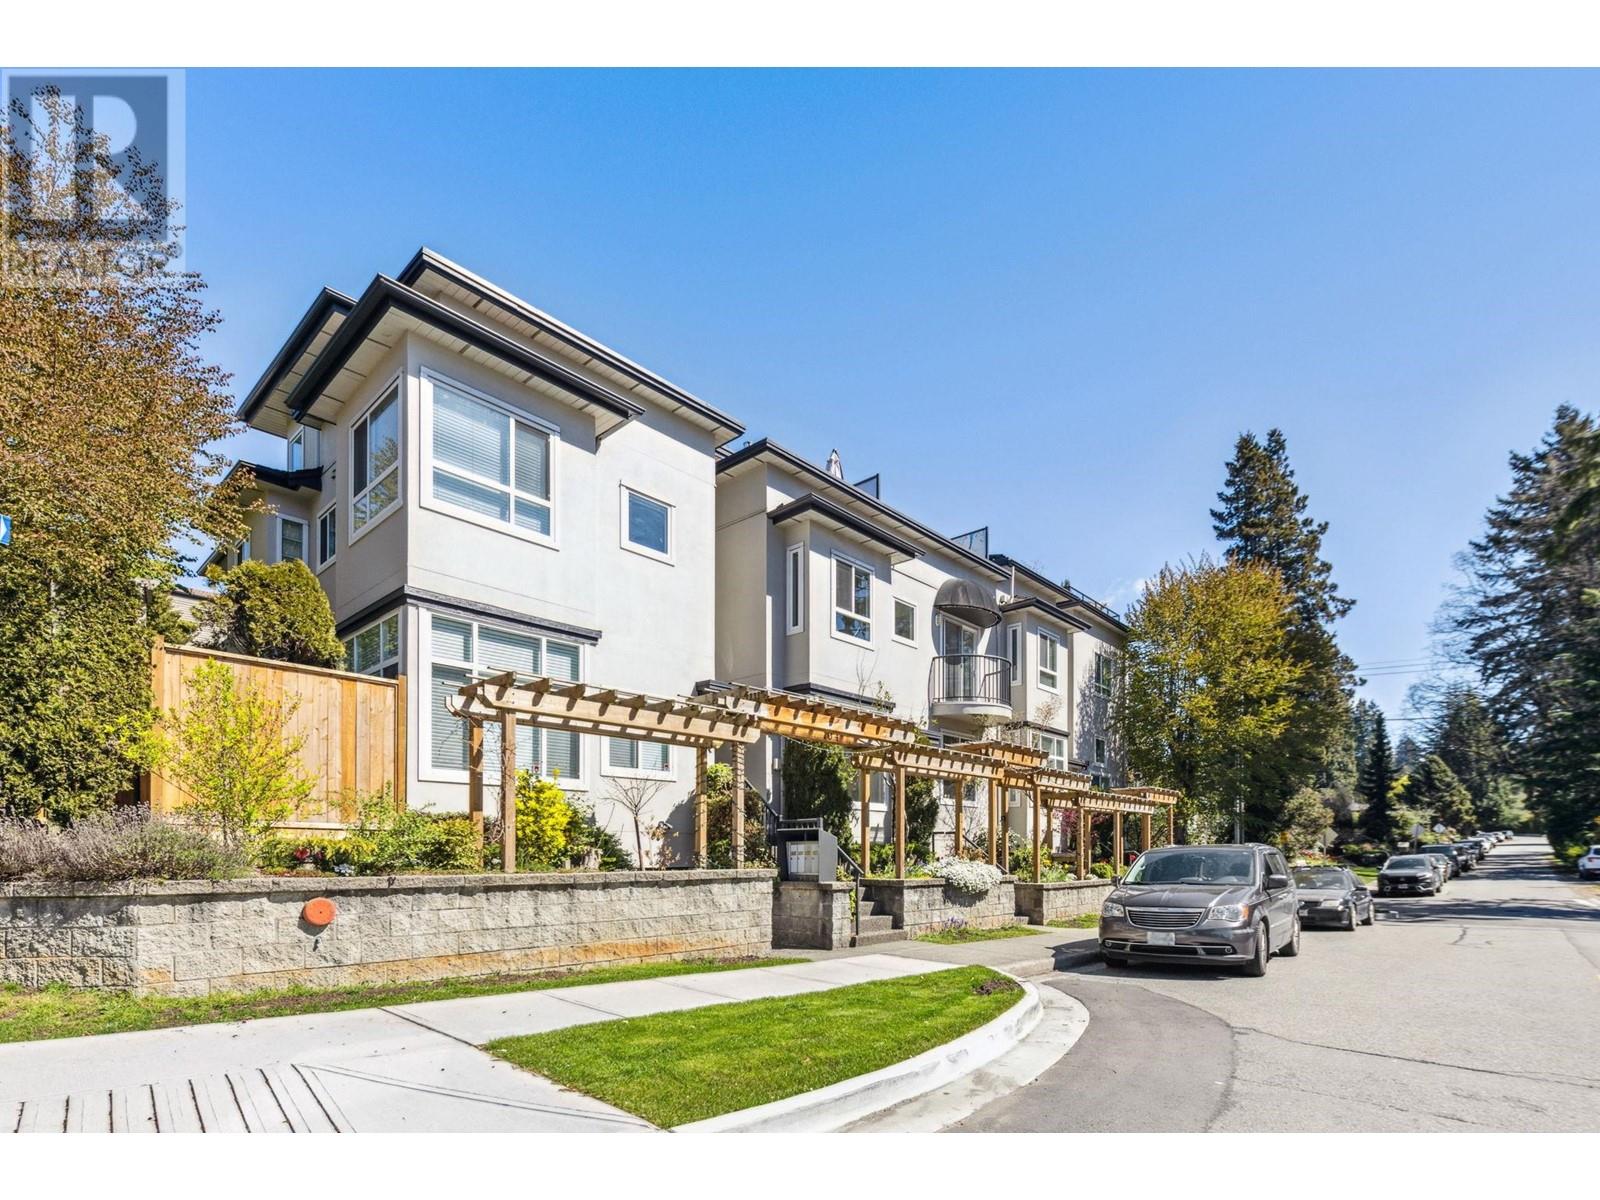 2606 LONSDALE AVENUE, north vancouver, British Columbia V7N3H9